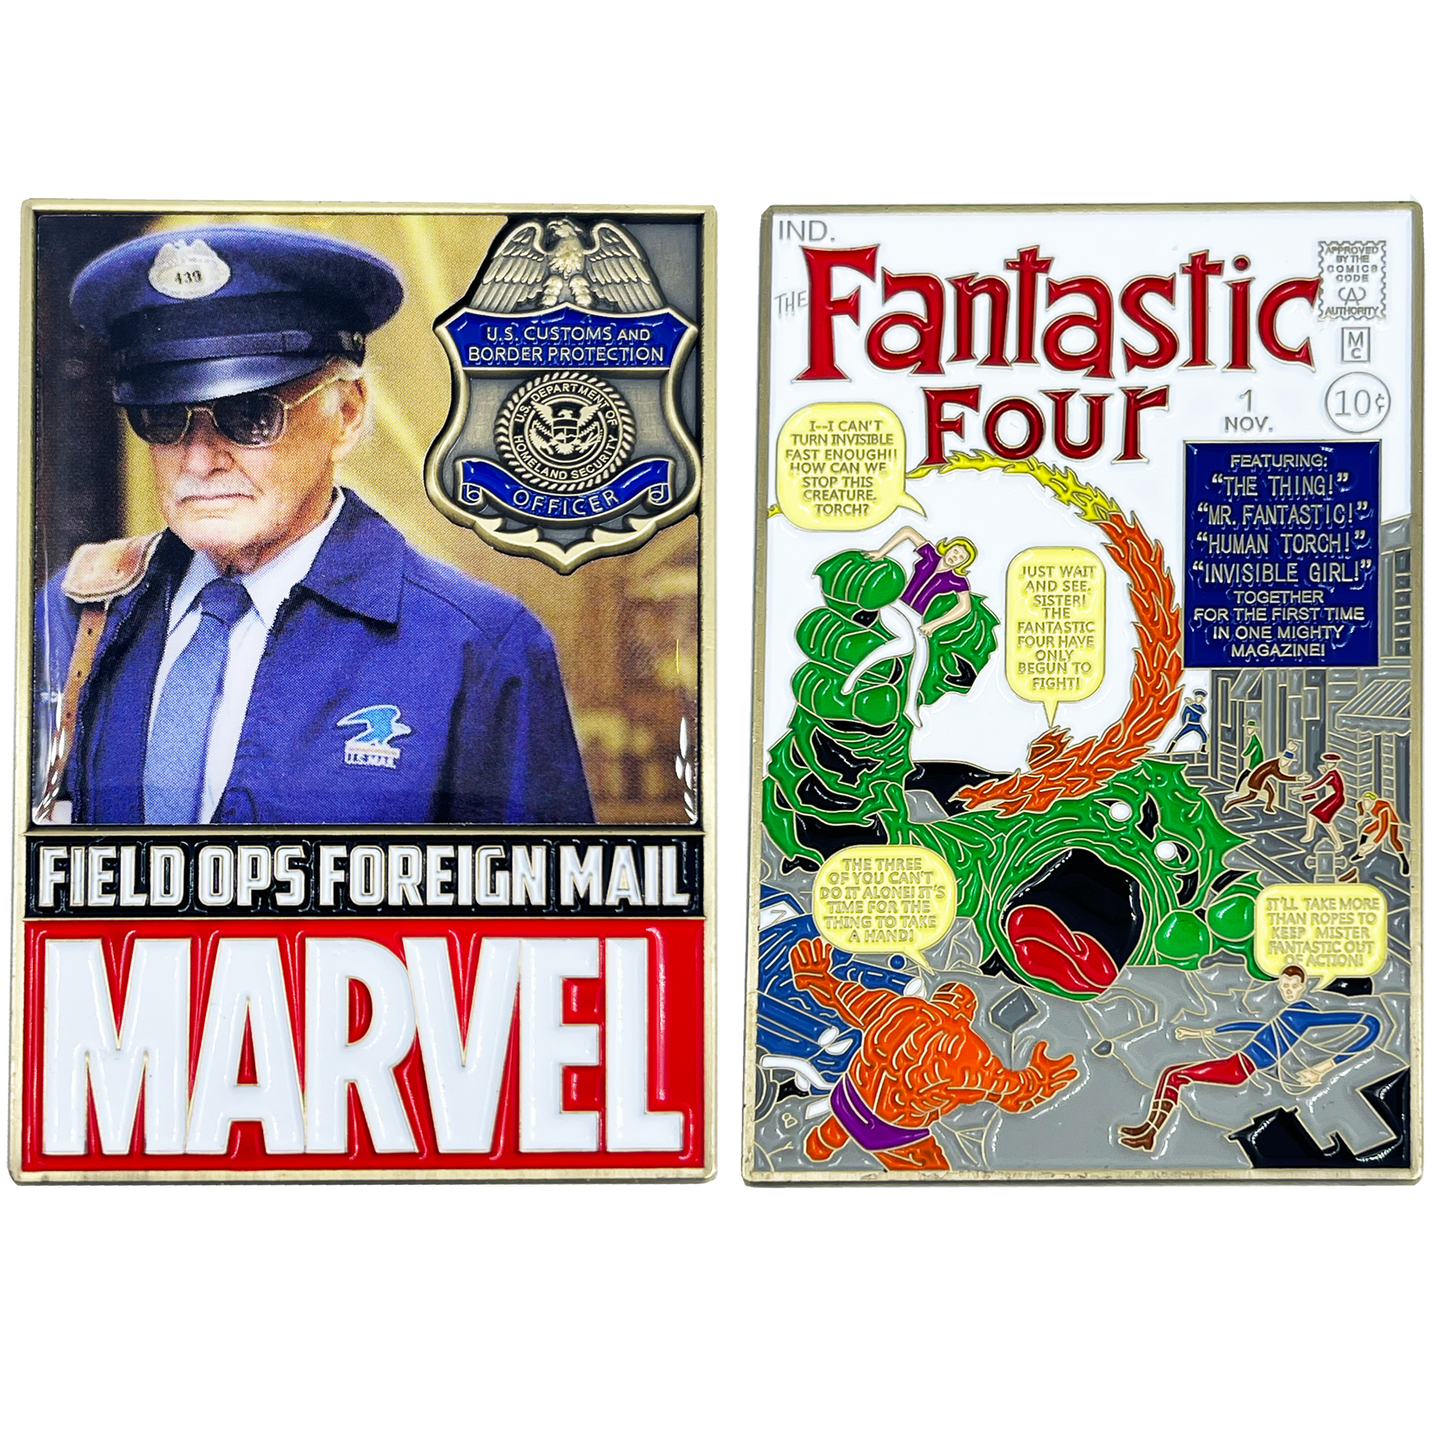 Discontinued BL11-018 Fantastic Four #1 Stan Lee CBP Officer Mail Carrier Foreign Mail Comic Book Challenge Coin